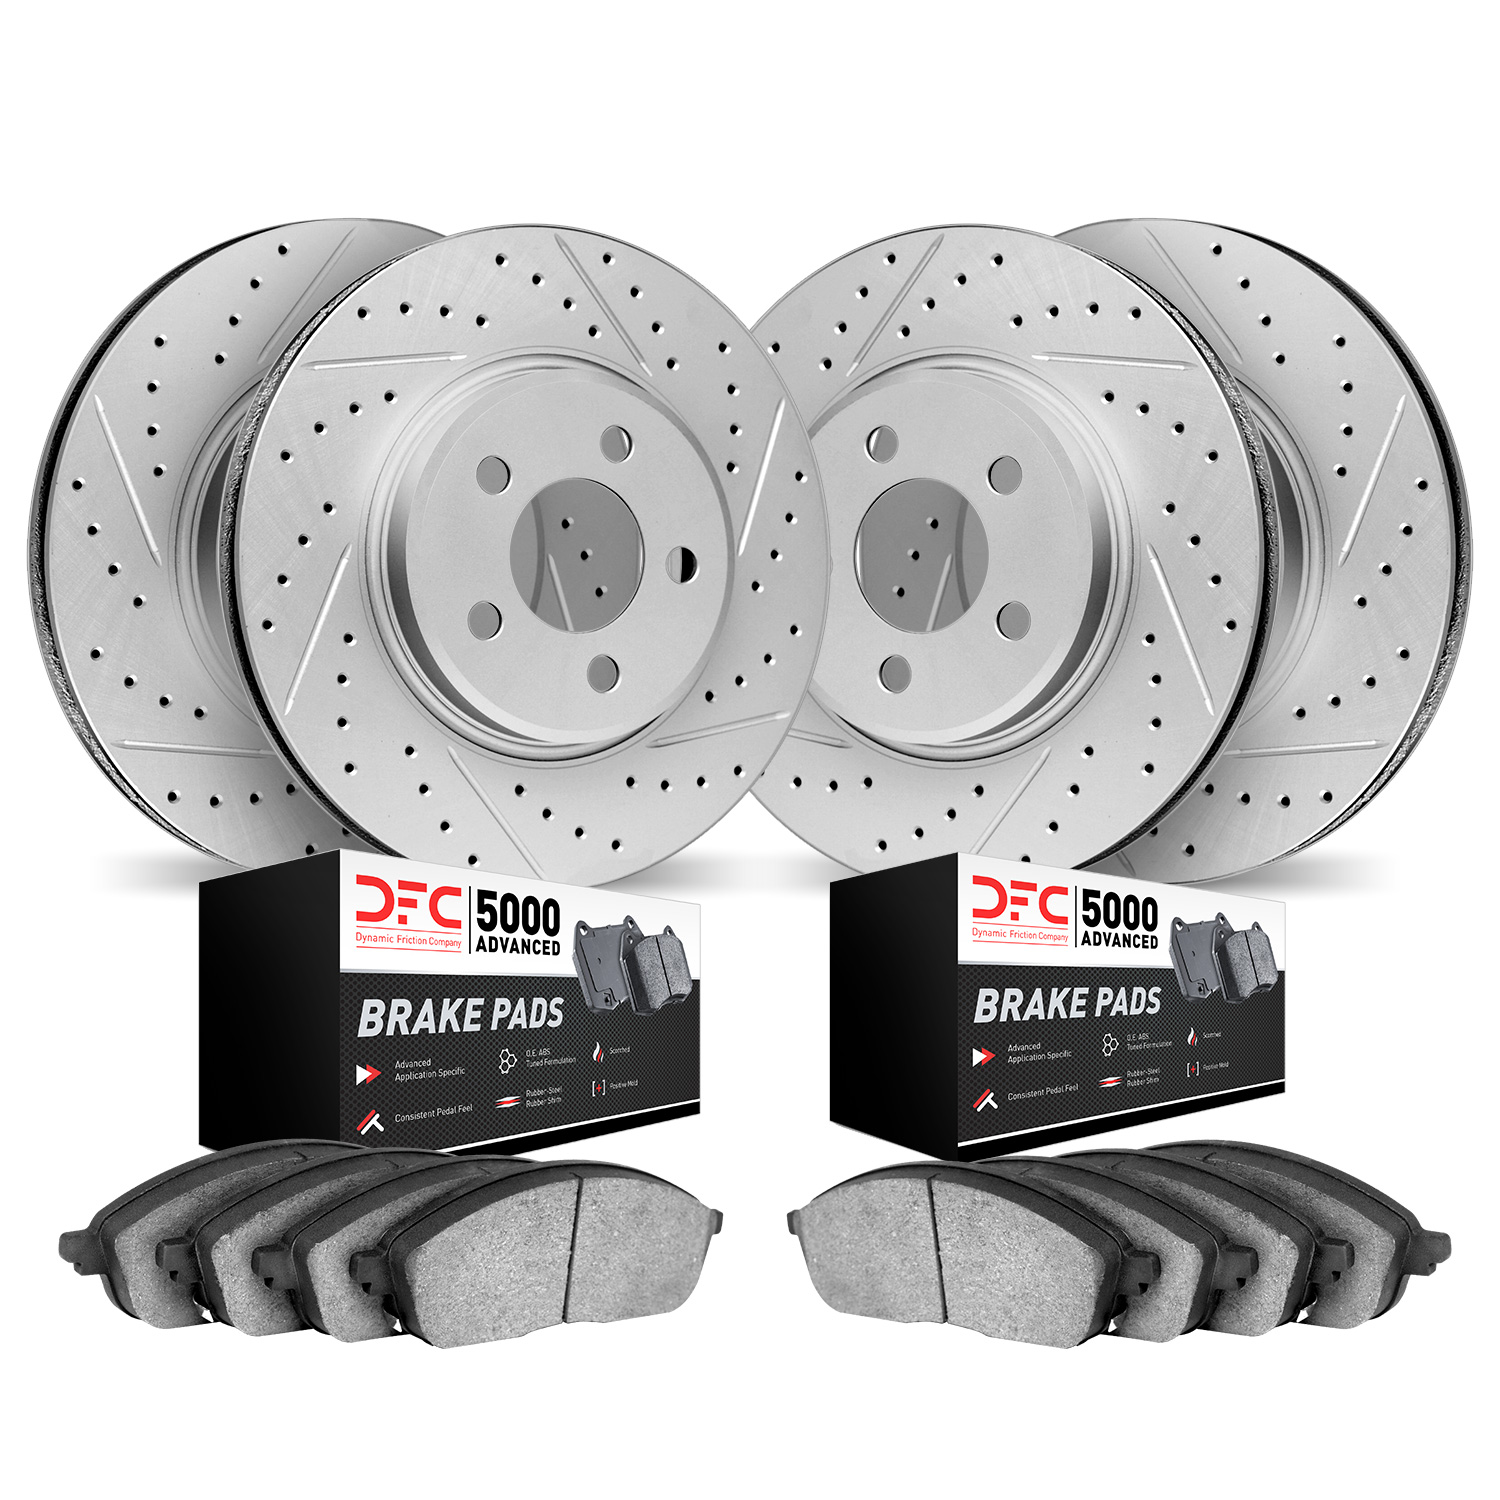 2504-74036 Geoperformance Drilled/Slotted Rotors w/5000 Advanced Brake Pads Kit, 2008-2009 Audi/Volkswagen, Position: Front and